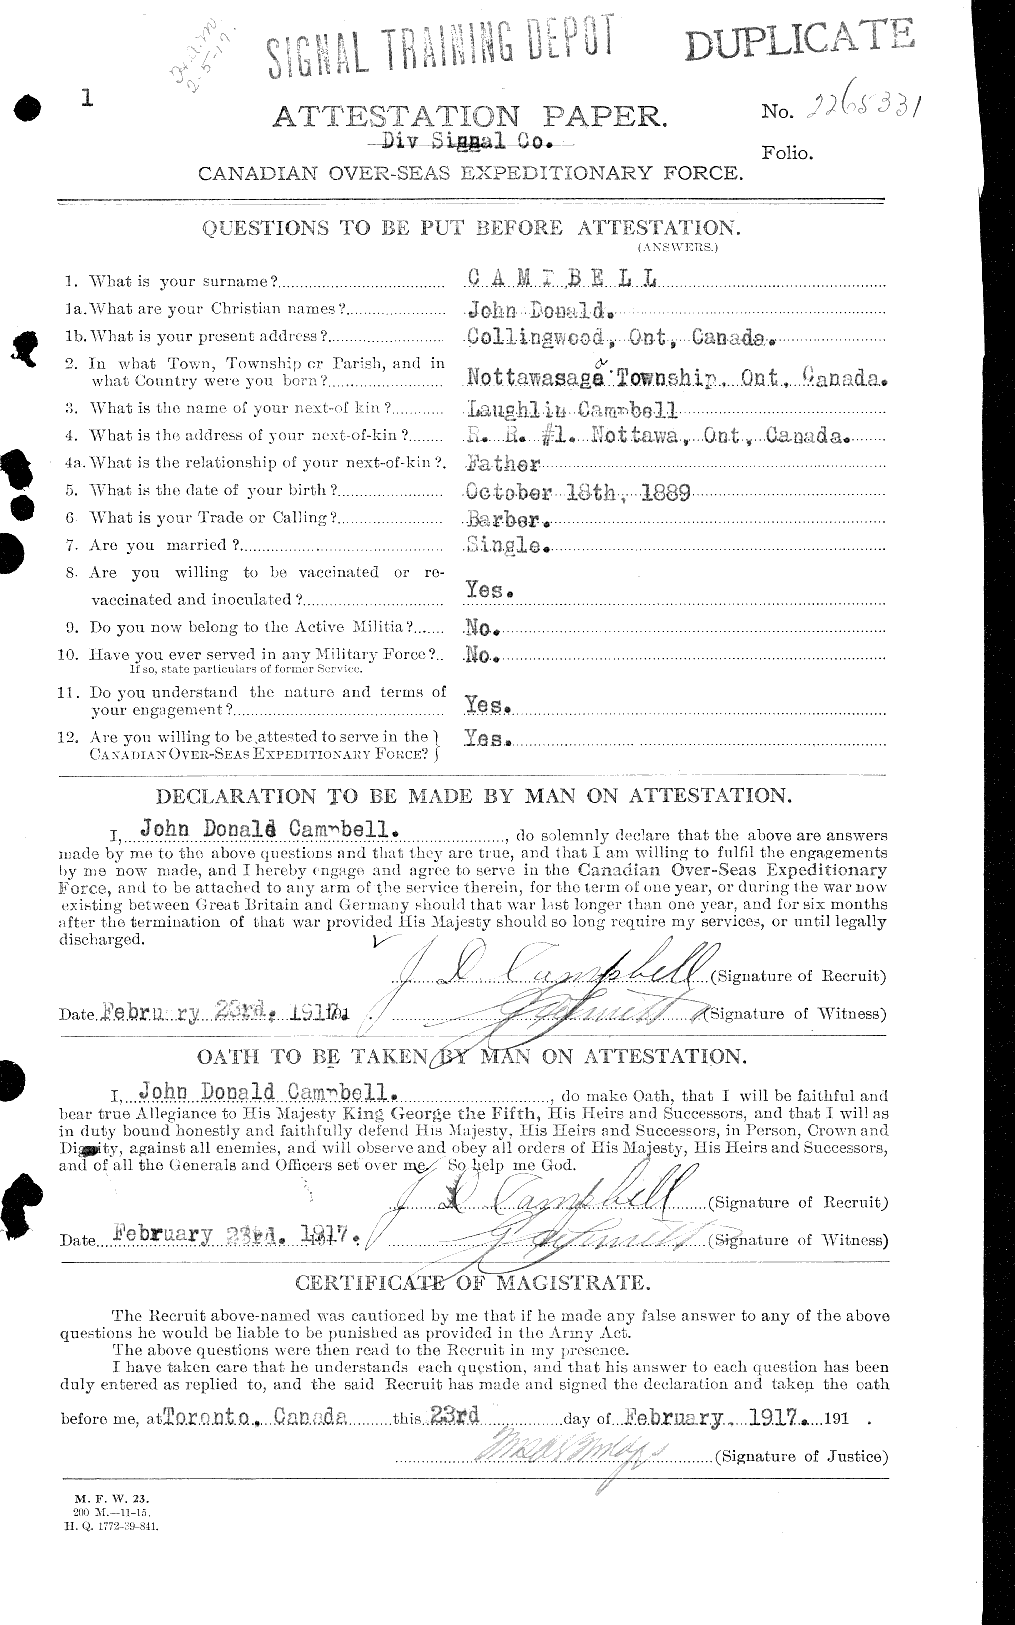 Personnel Records of the First World War - CEF 008502a